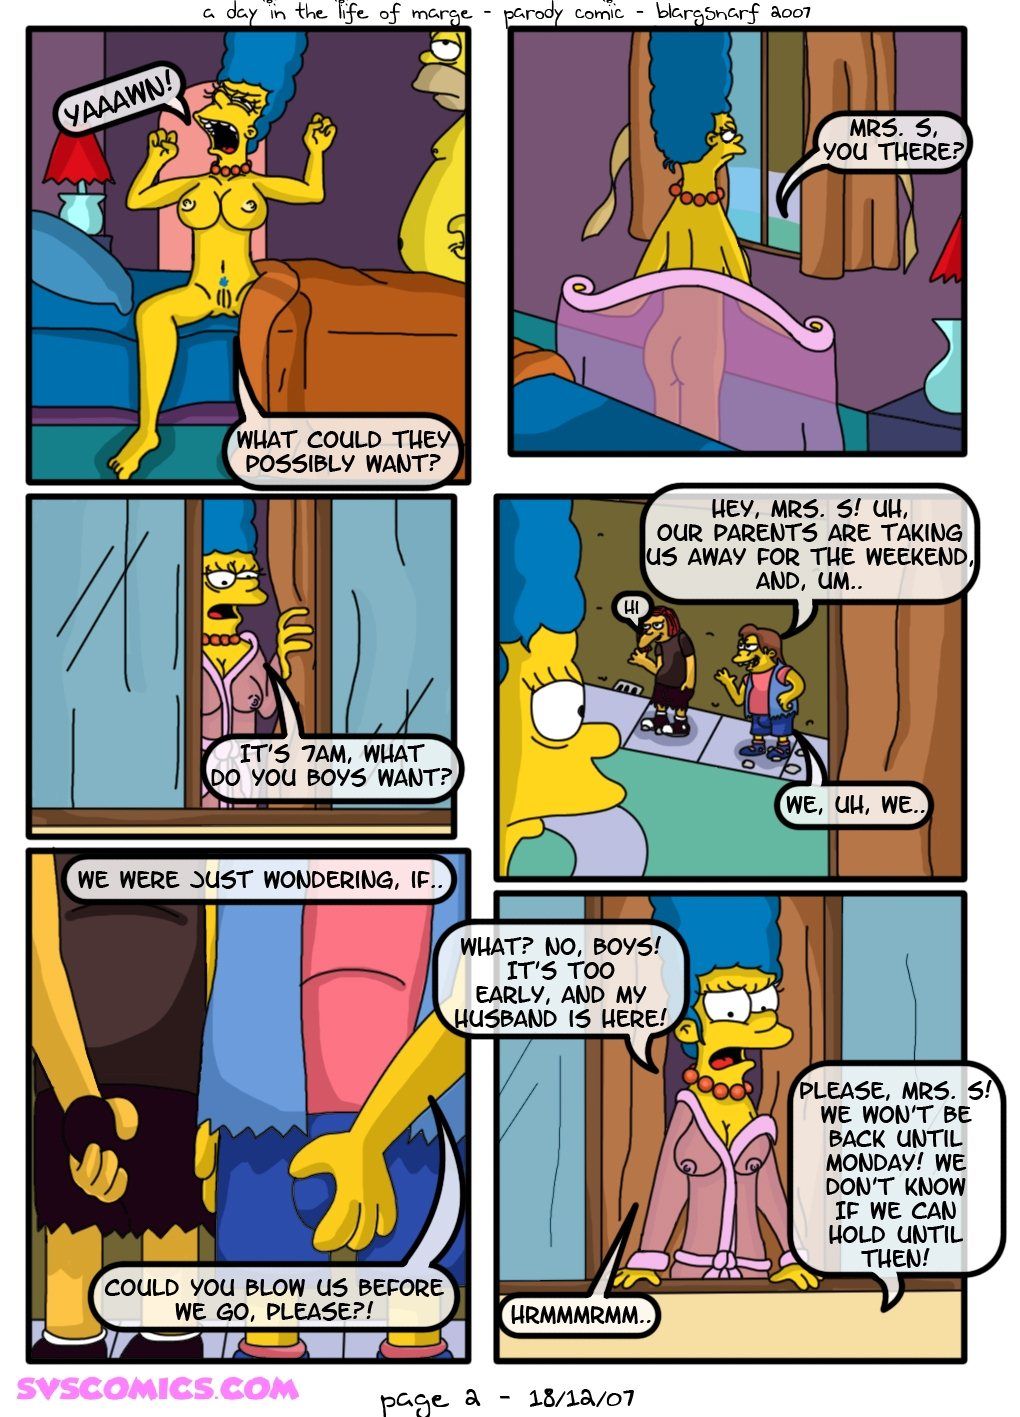 [Blargsnarf] A Day Life of Marge (The Simpsons) page 3